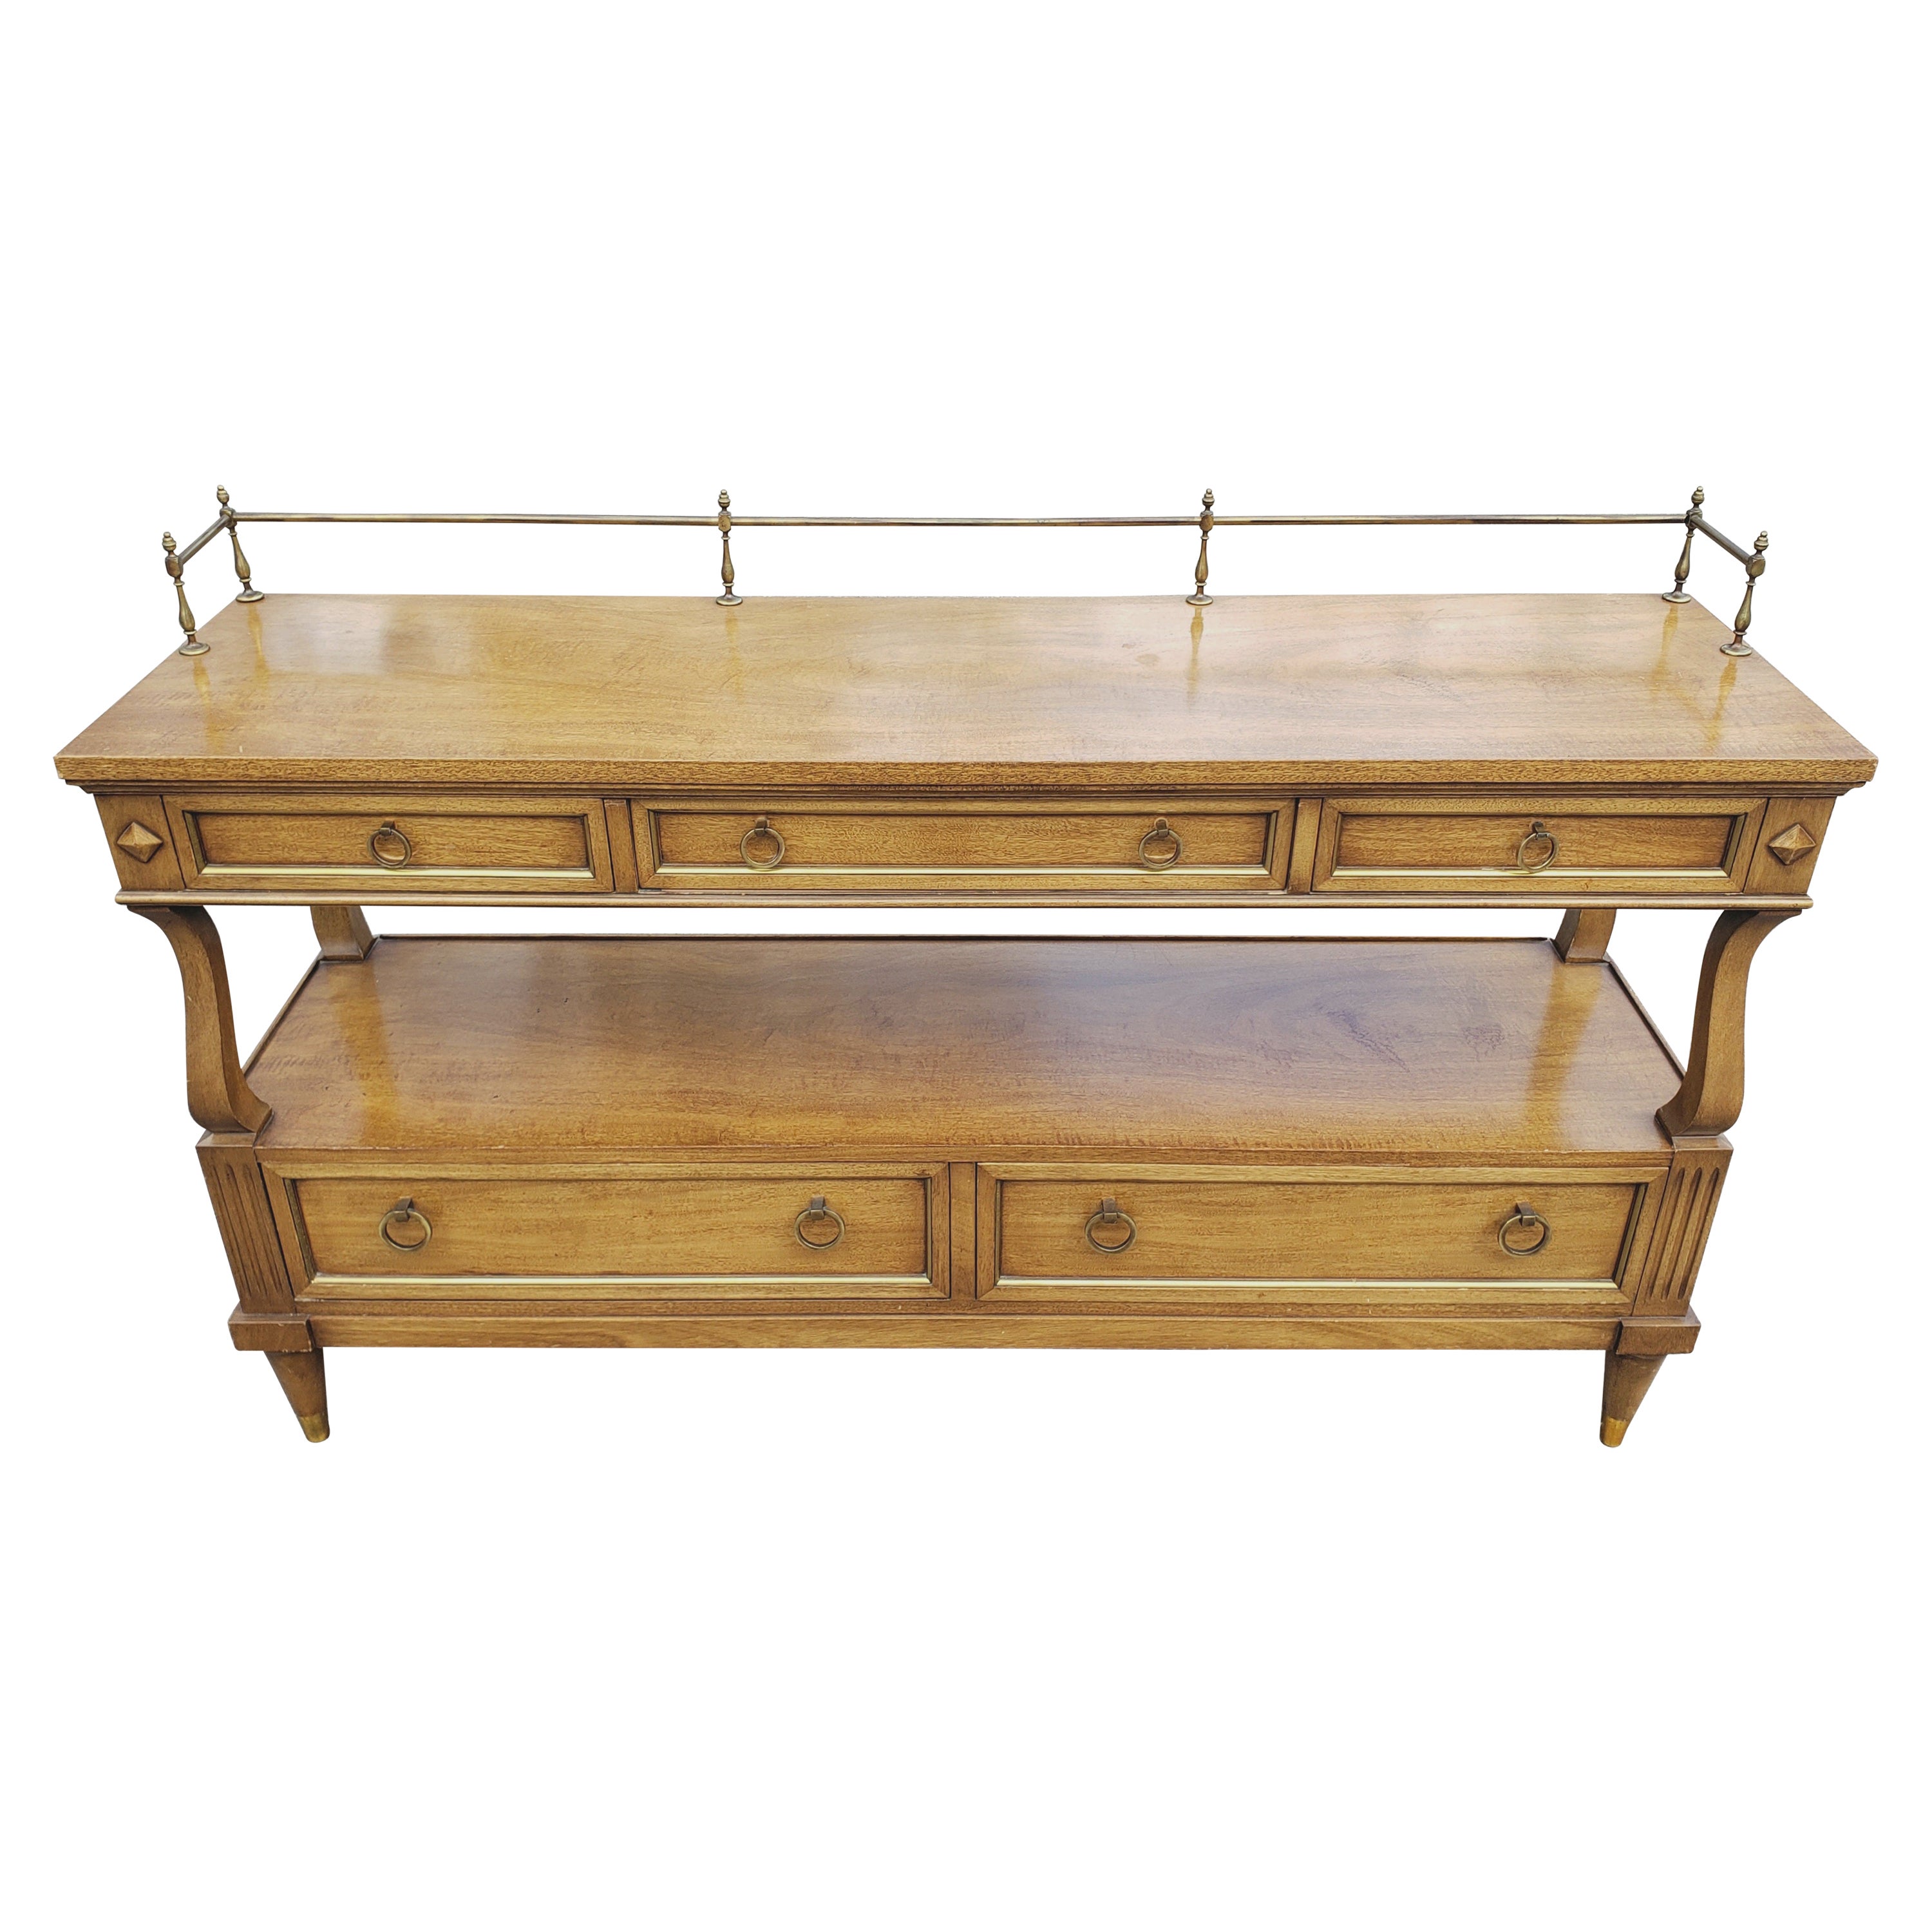 De Bournais French Neoclassical Tiered Brass Mounted Galleried Walnut Sideboard For Sale